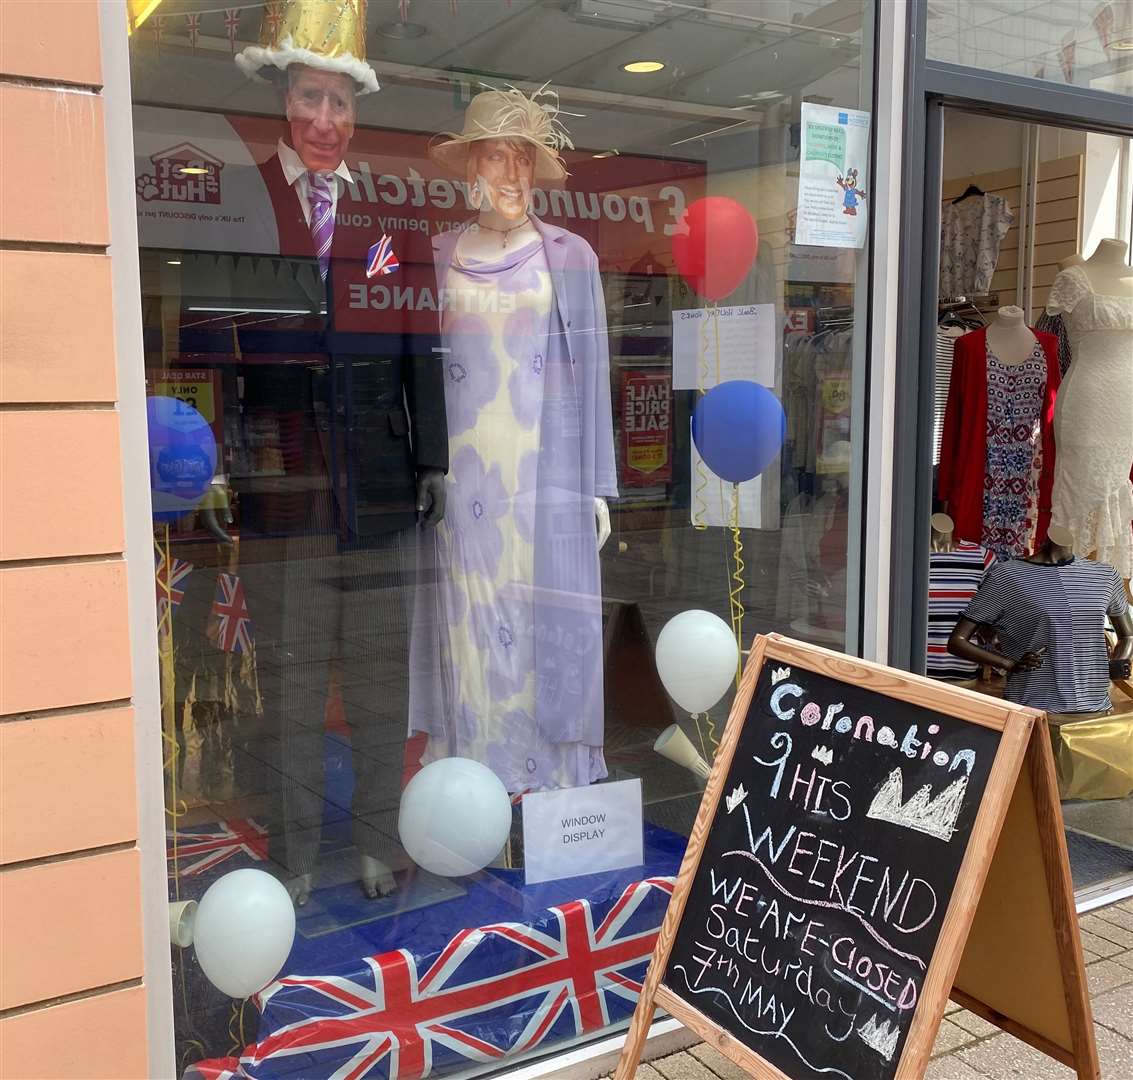 The Norfolk Hospice shop created statues of Charles and Camilla